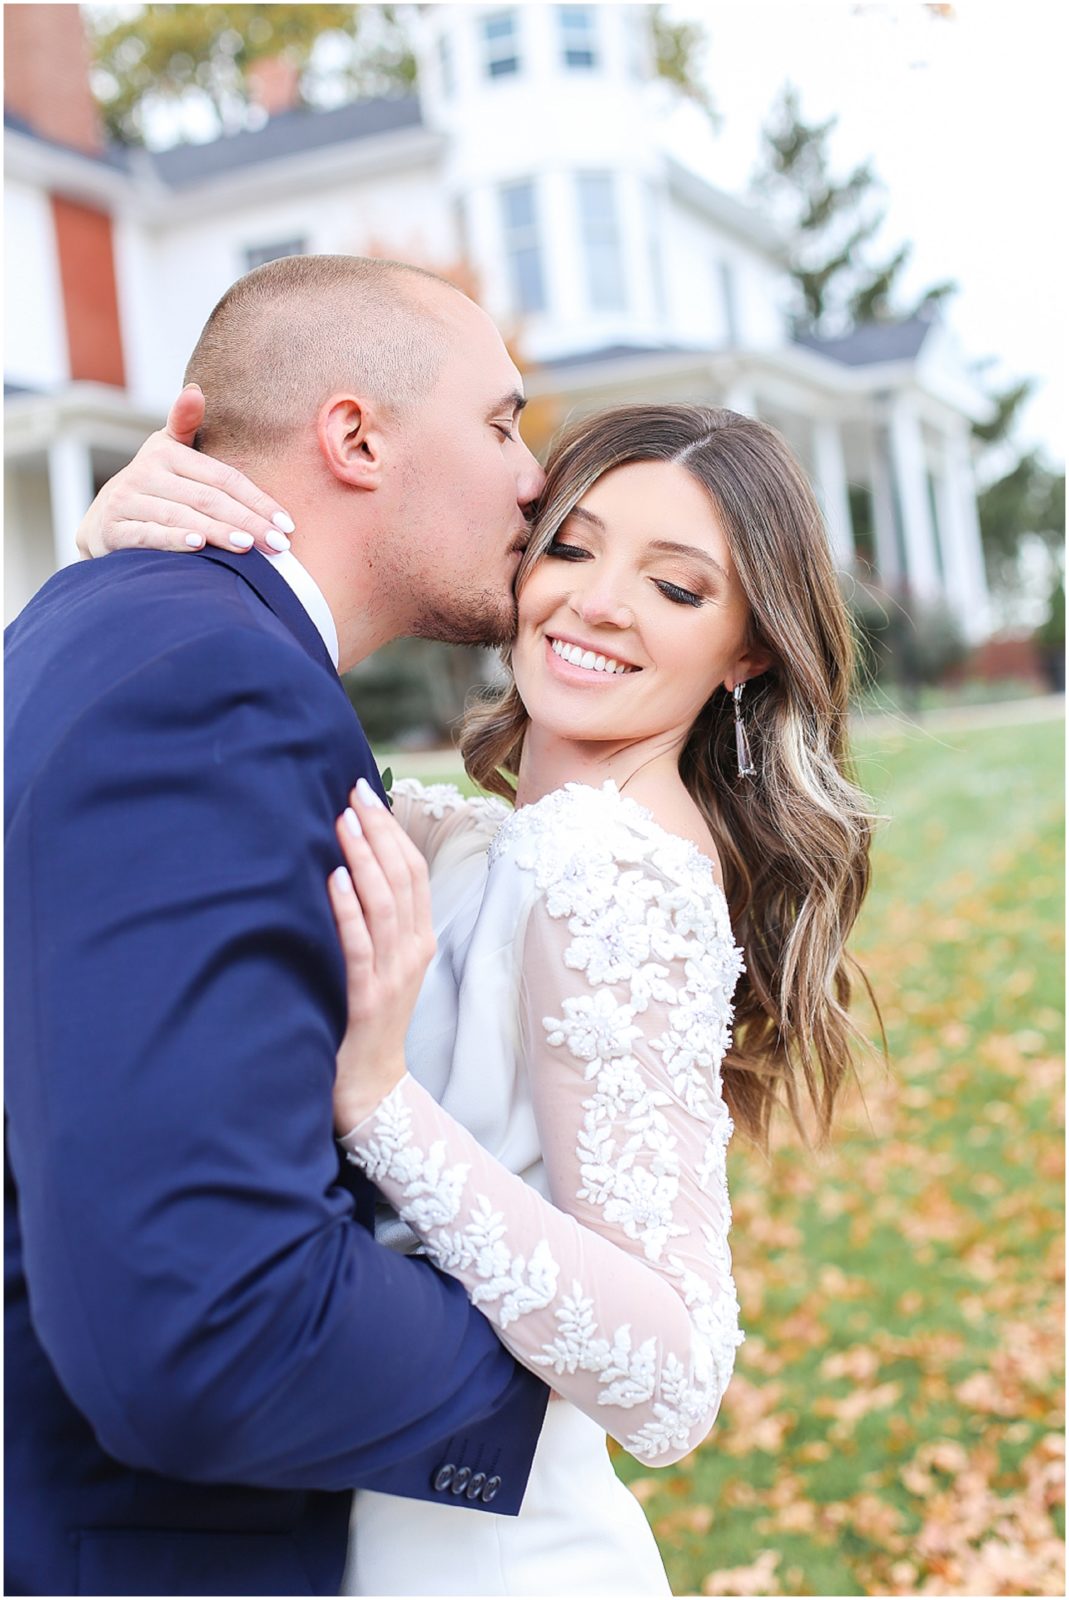 ADORABLE BRIDE AND GROOM AT 1890 WITH LONG SLEEVE WEDDING DRESS Kansas City Wedding Venue - 1890 - The Fields at Eighteen Ninenty - Mariam Saifan Photography - Kansas City Portrait + Wedding Photographer - Wedding Planners in KC 